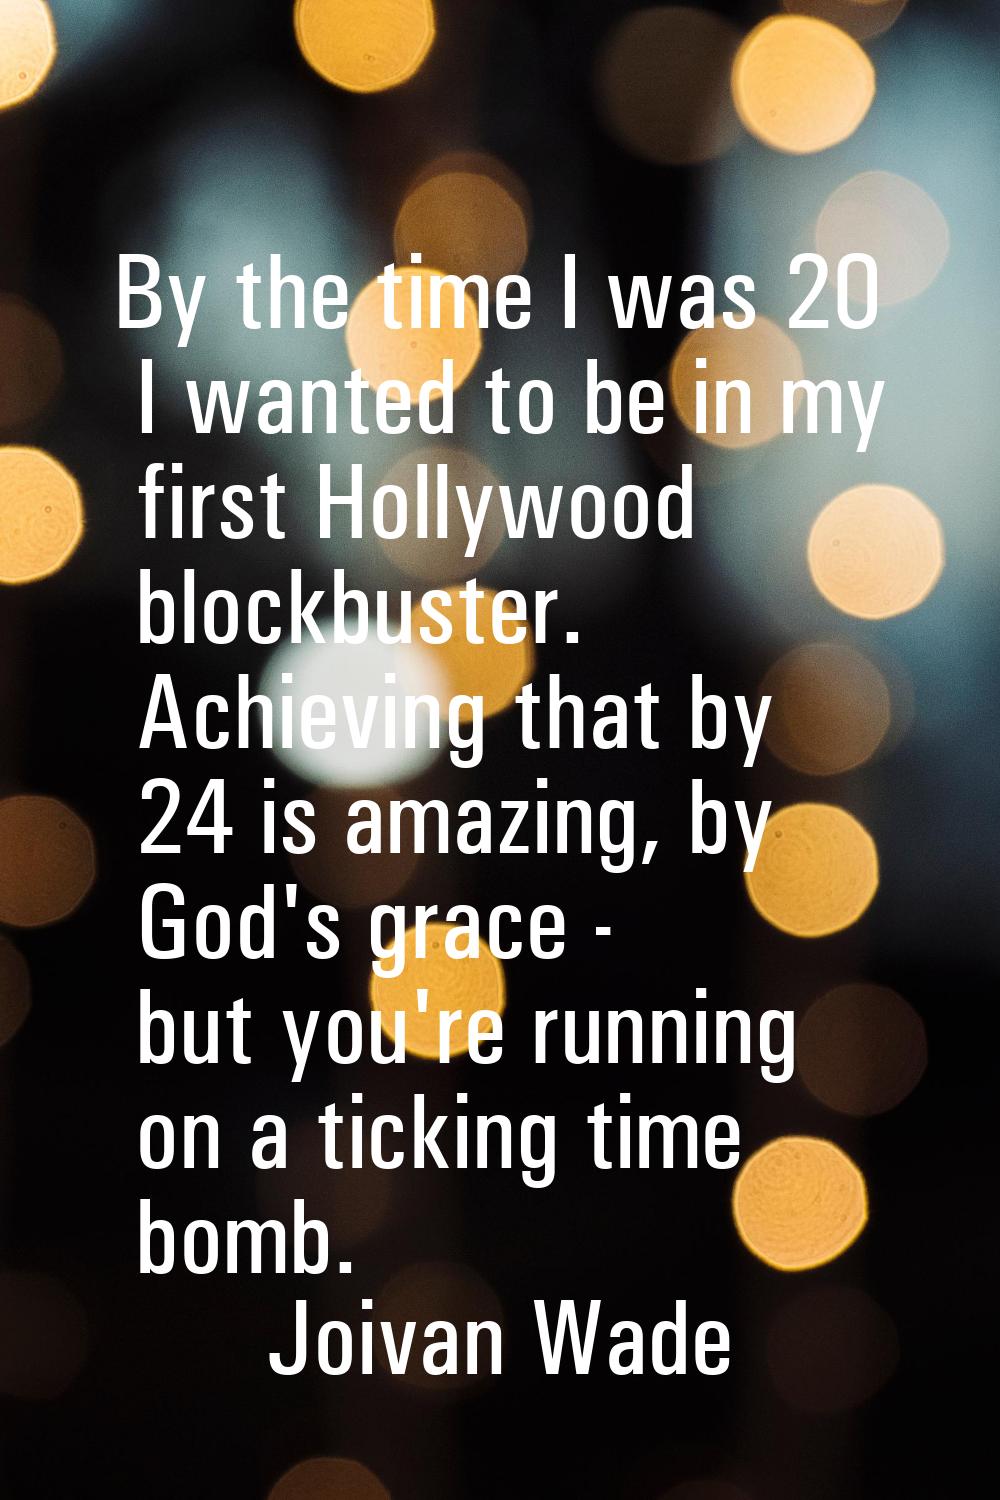 By the time I was 20 I wanted to be in my first Hollywood blockbuster. Achieving that by 24 is amaz